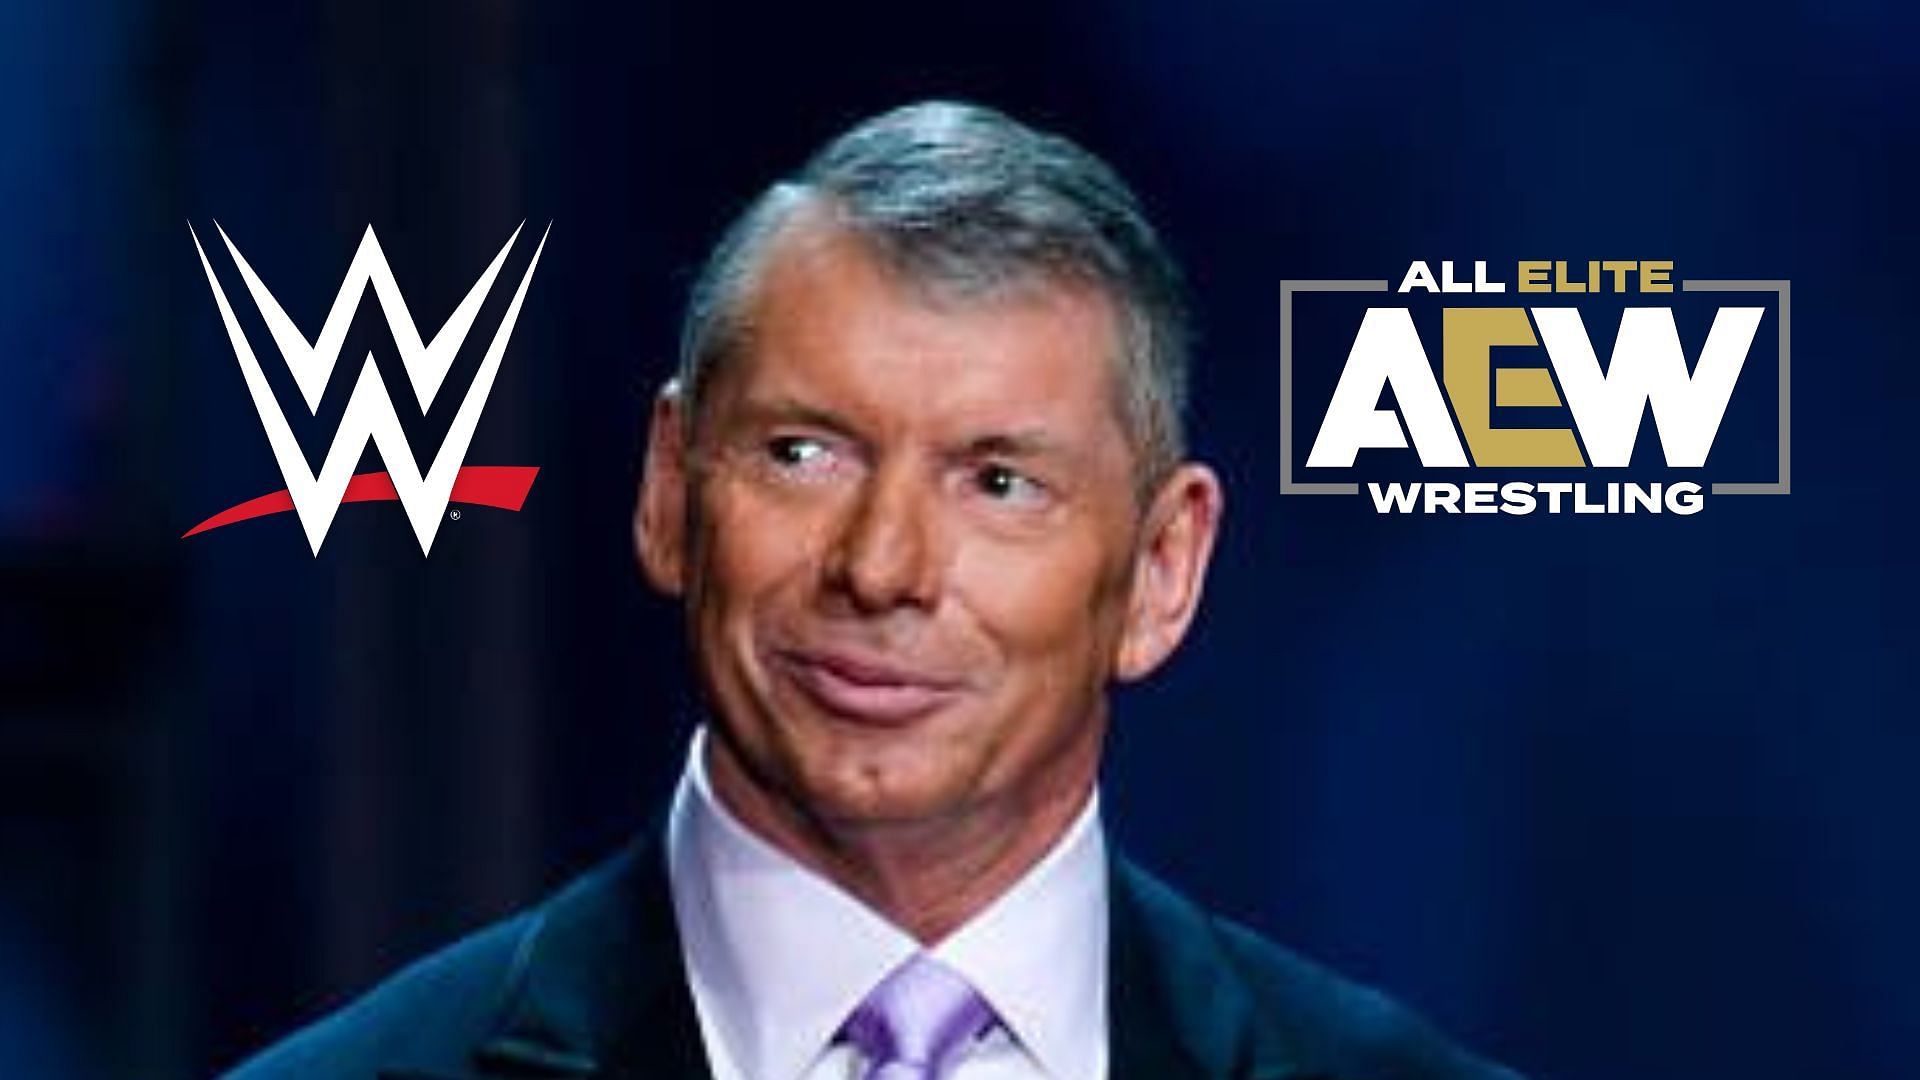 A popular AEW star had a not so successful run in WWE while Vince McMahon was in charge